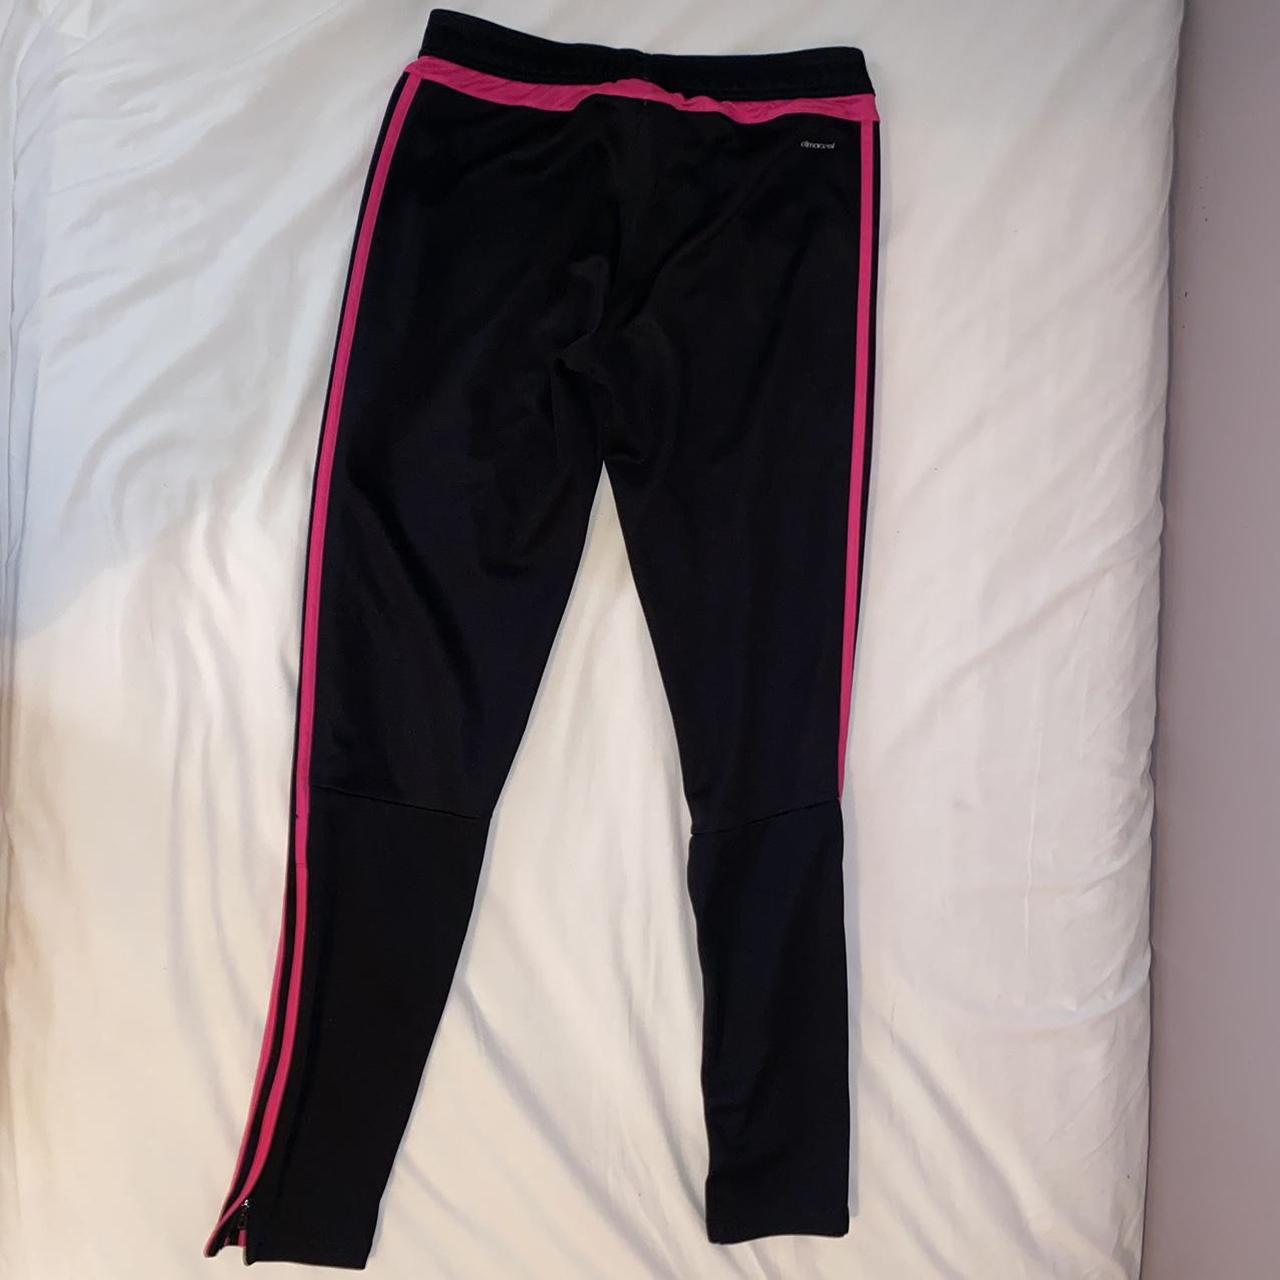 Pink Adidas soccer pants with climacool. Extremely